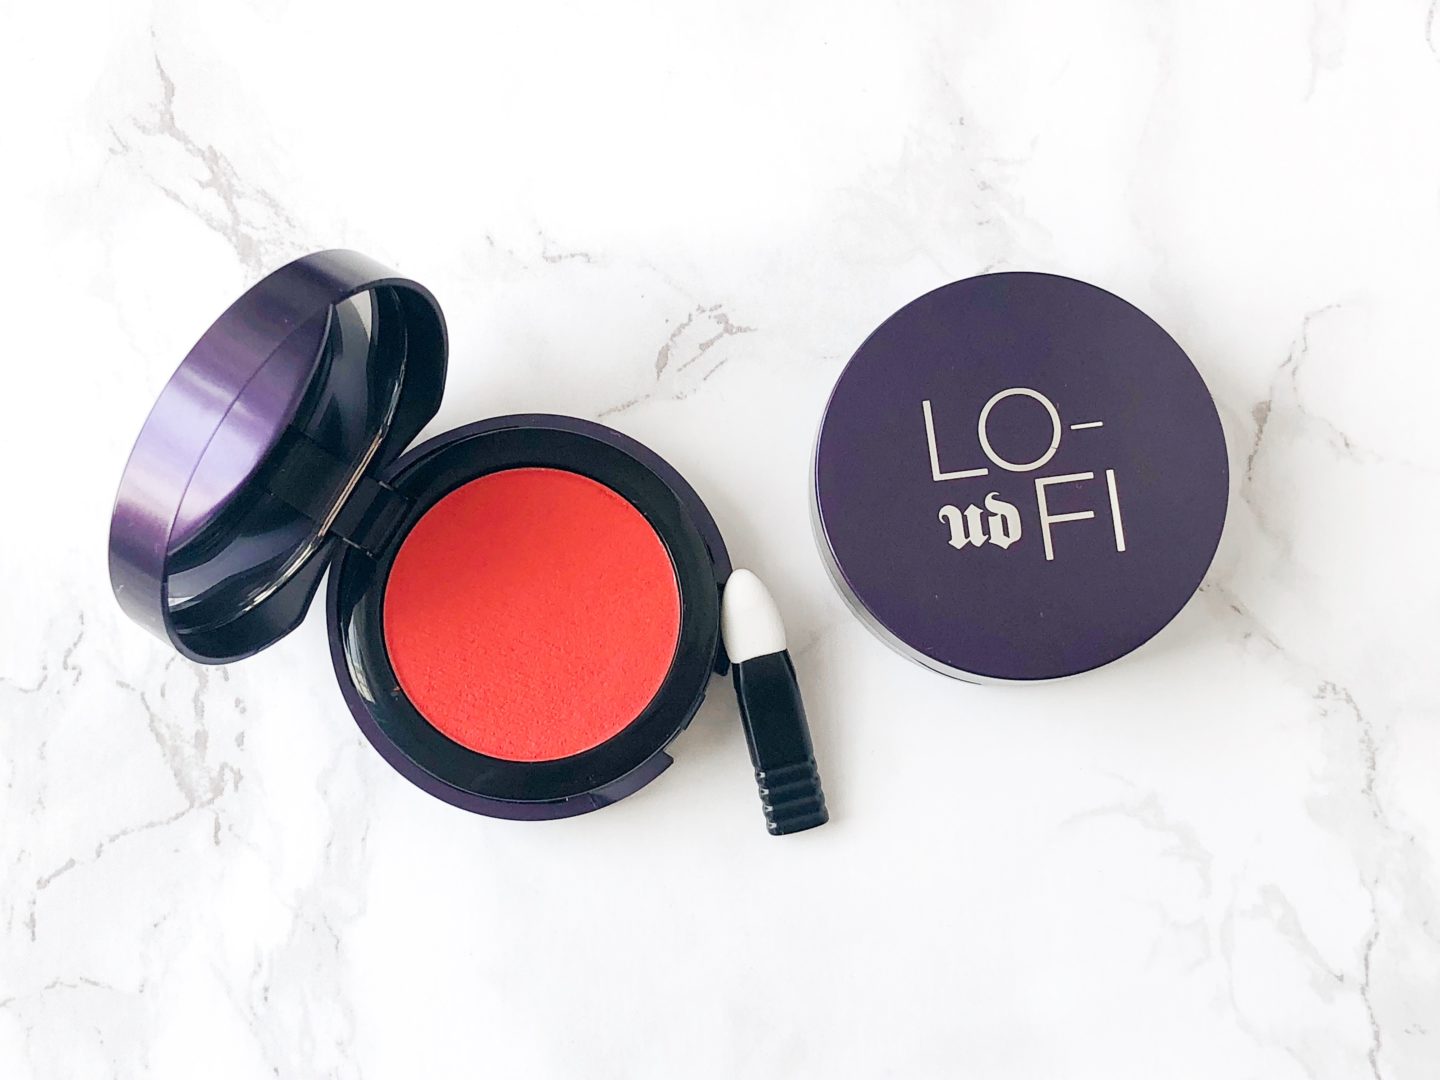 URBAN DECAY LO-FI LIP MOUSSE REVIEW 